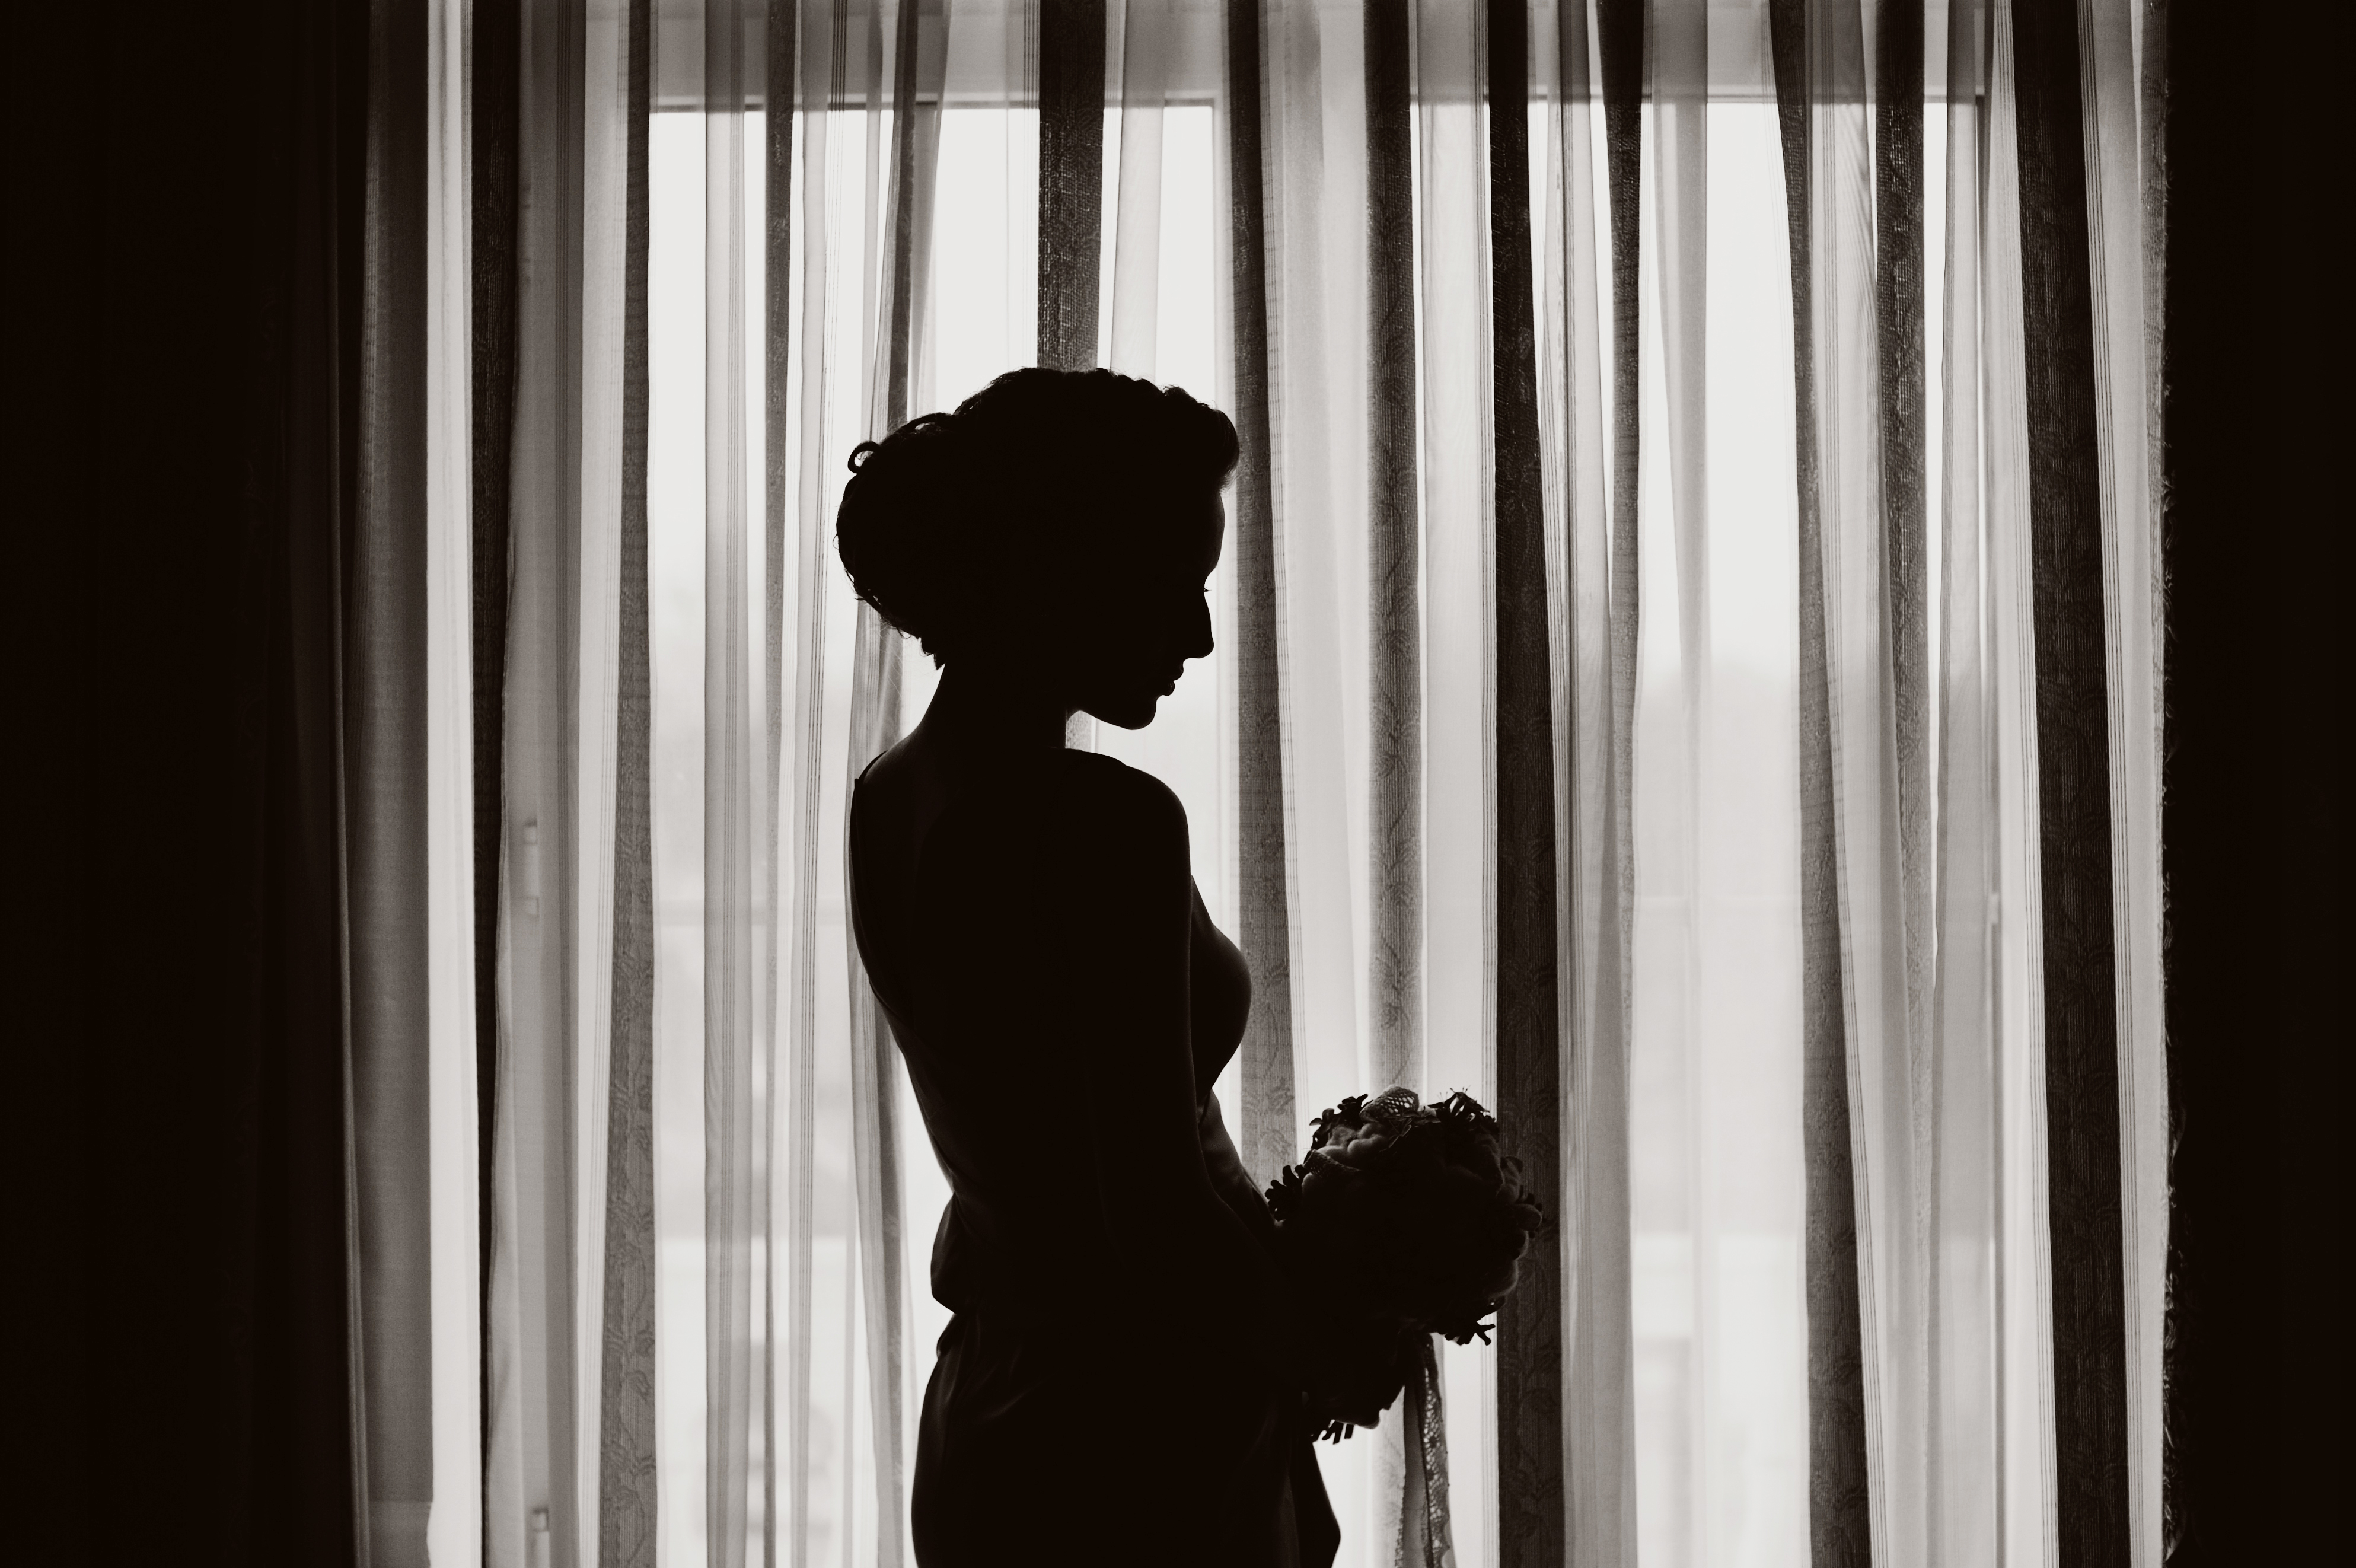 Silhouette of a girl | Source: Shutterstock